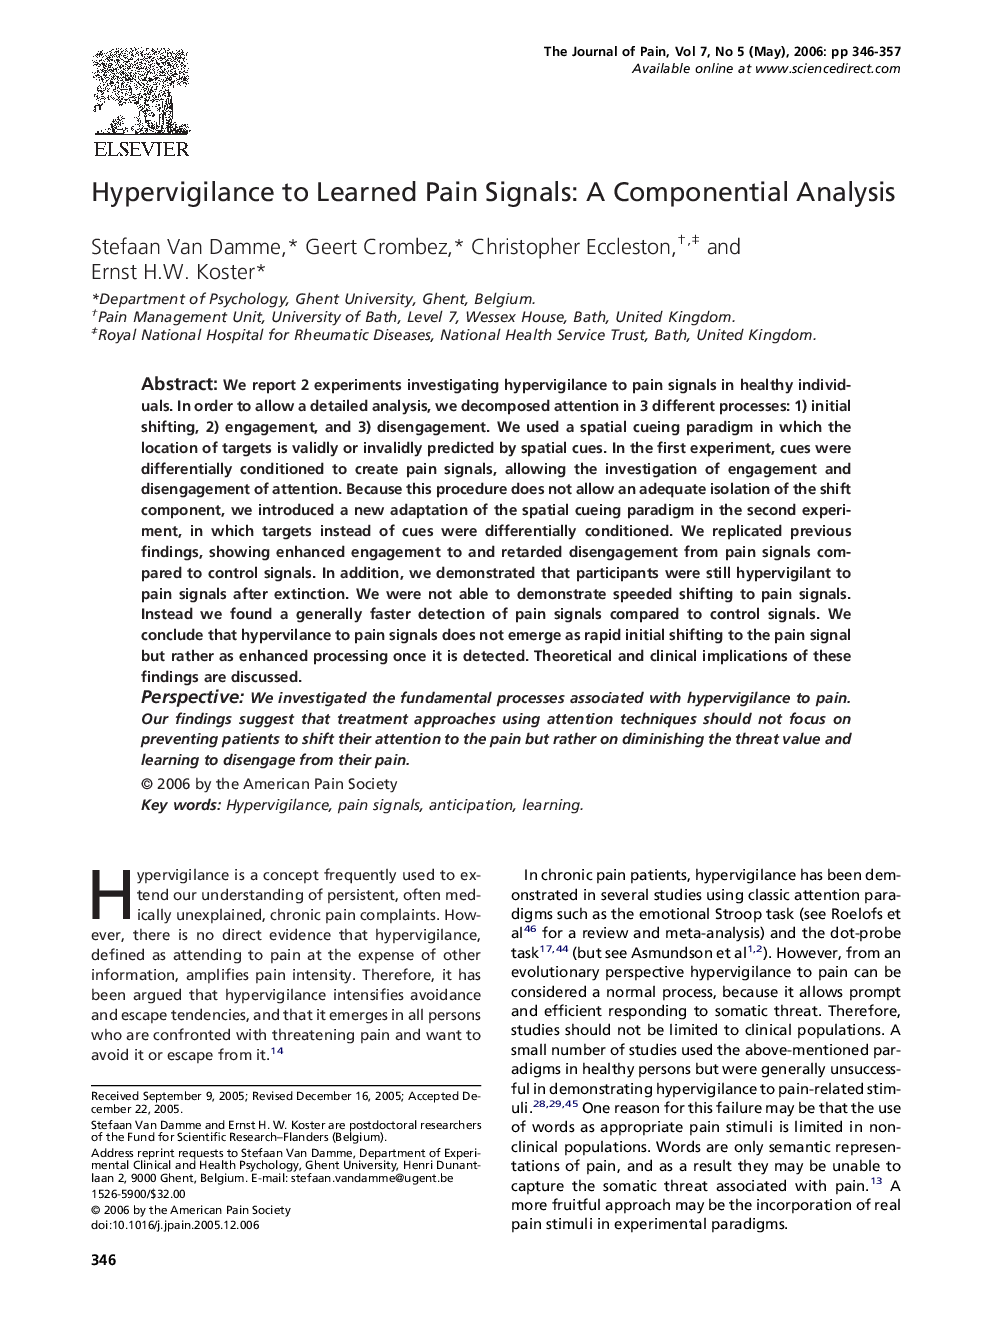 Hypervigilance to Learned Pain Signals: A Componential Analysis 